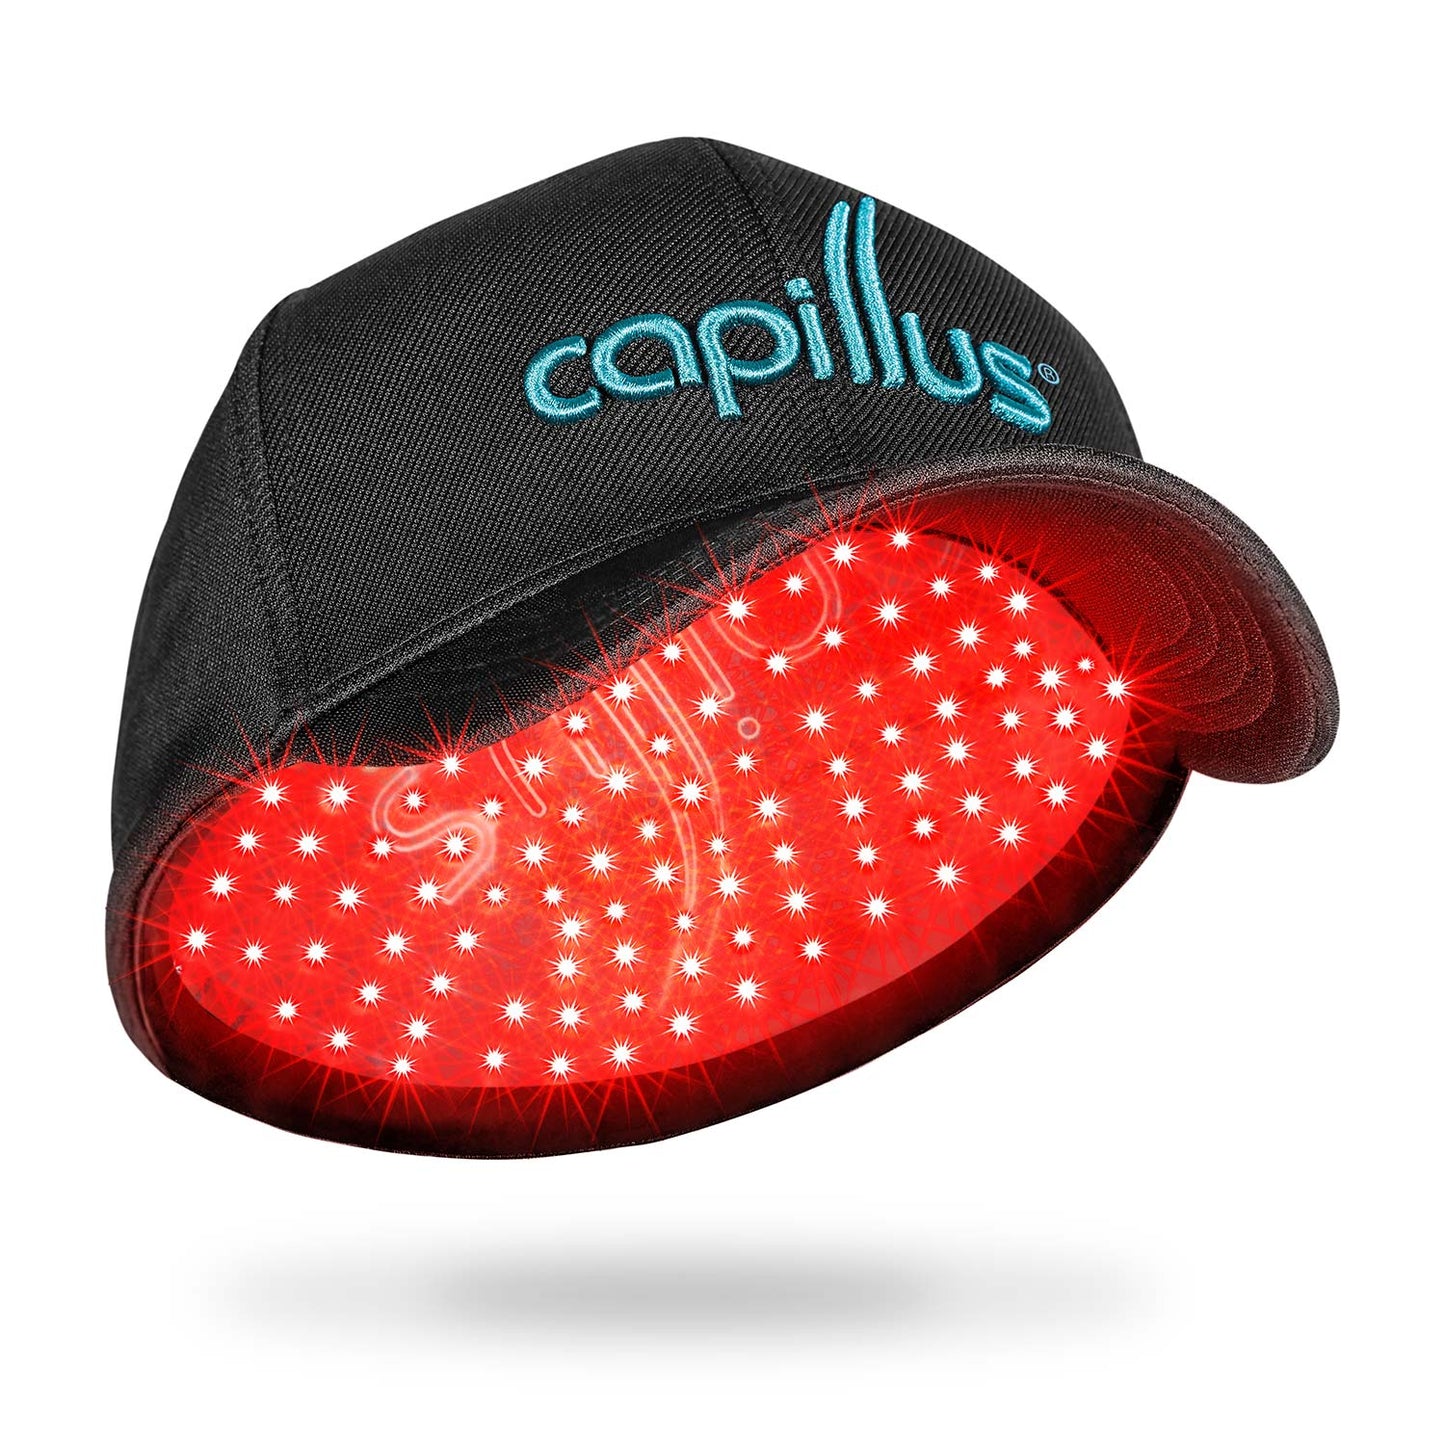 CapillusRX™ laser therapy cap for hair regrowth – 312 laser diodes